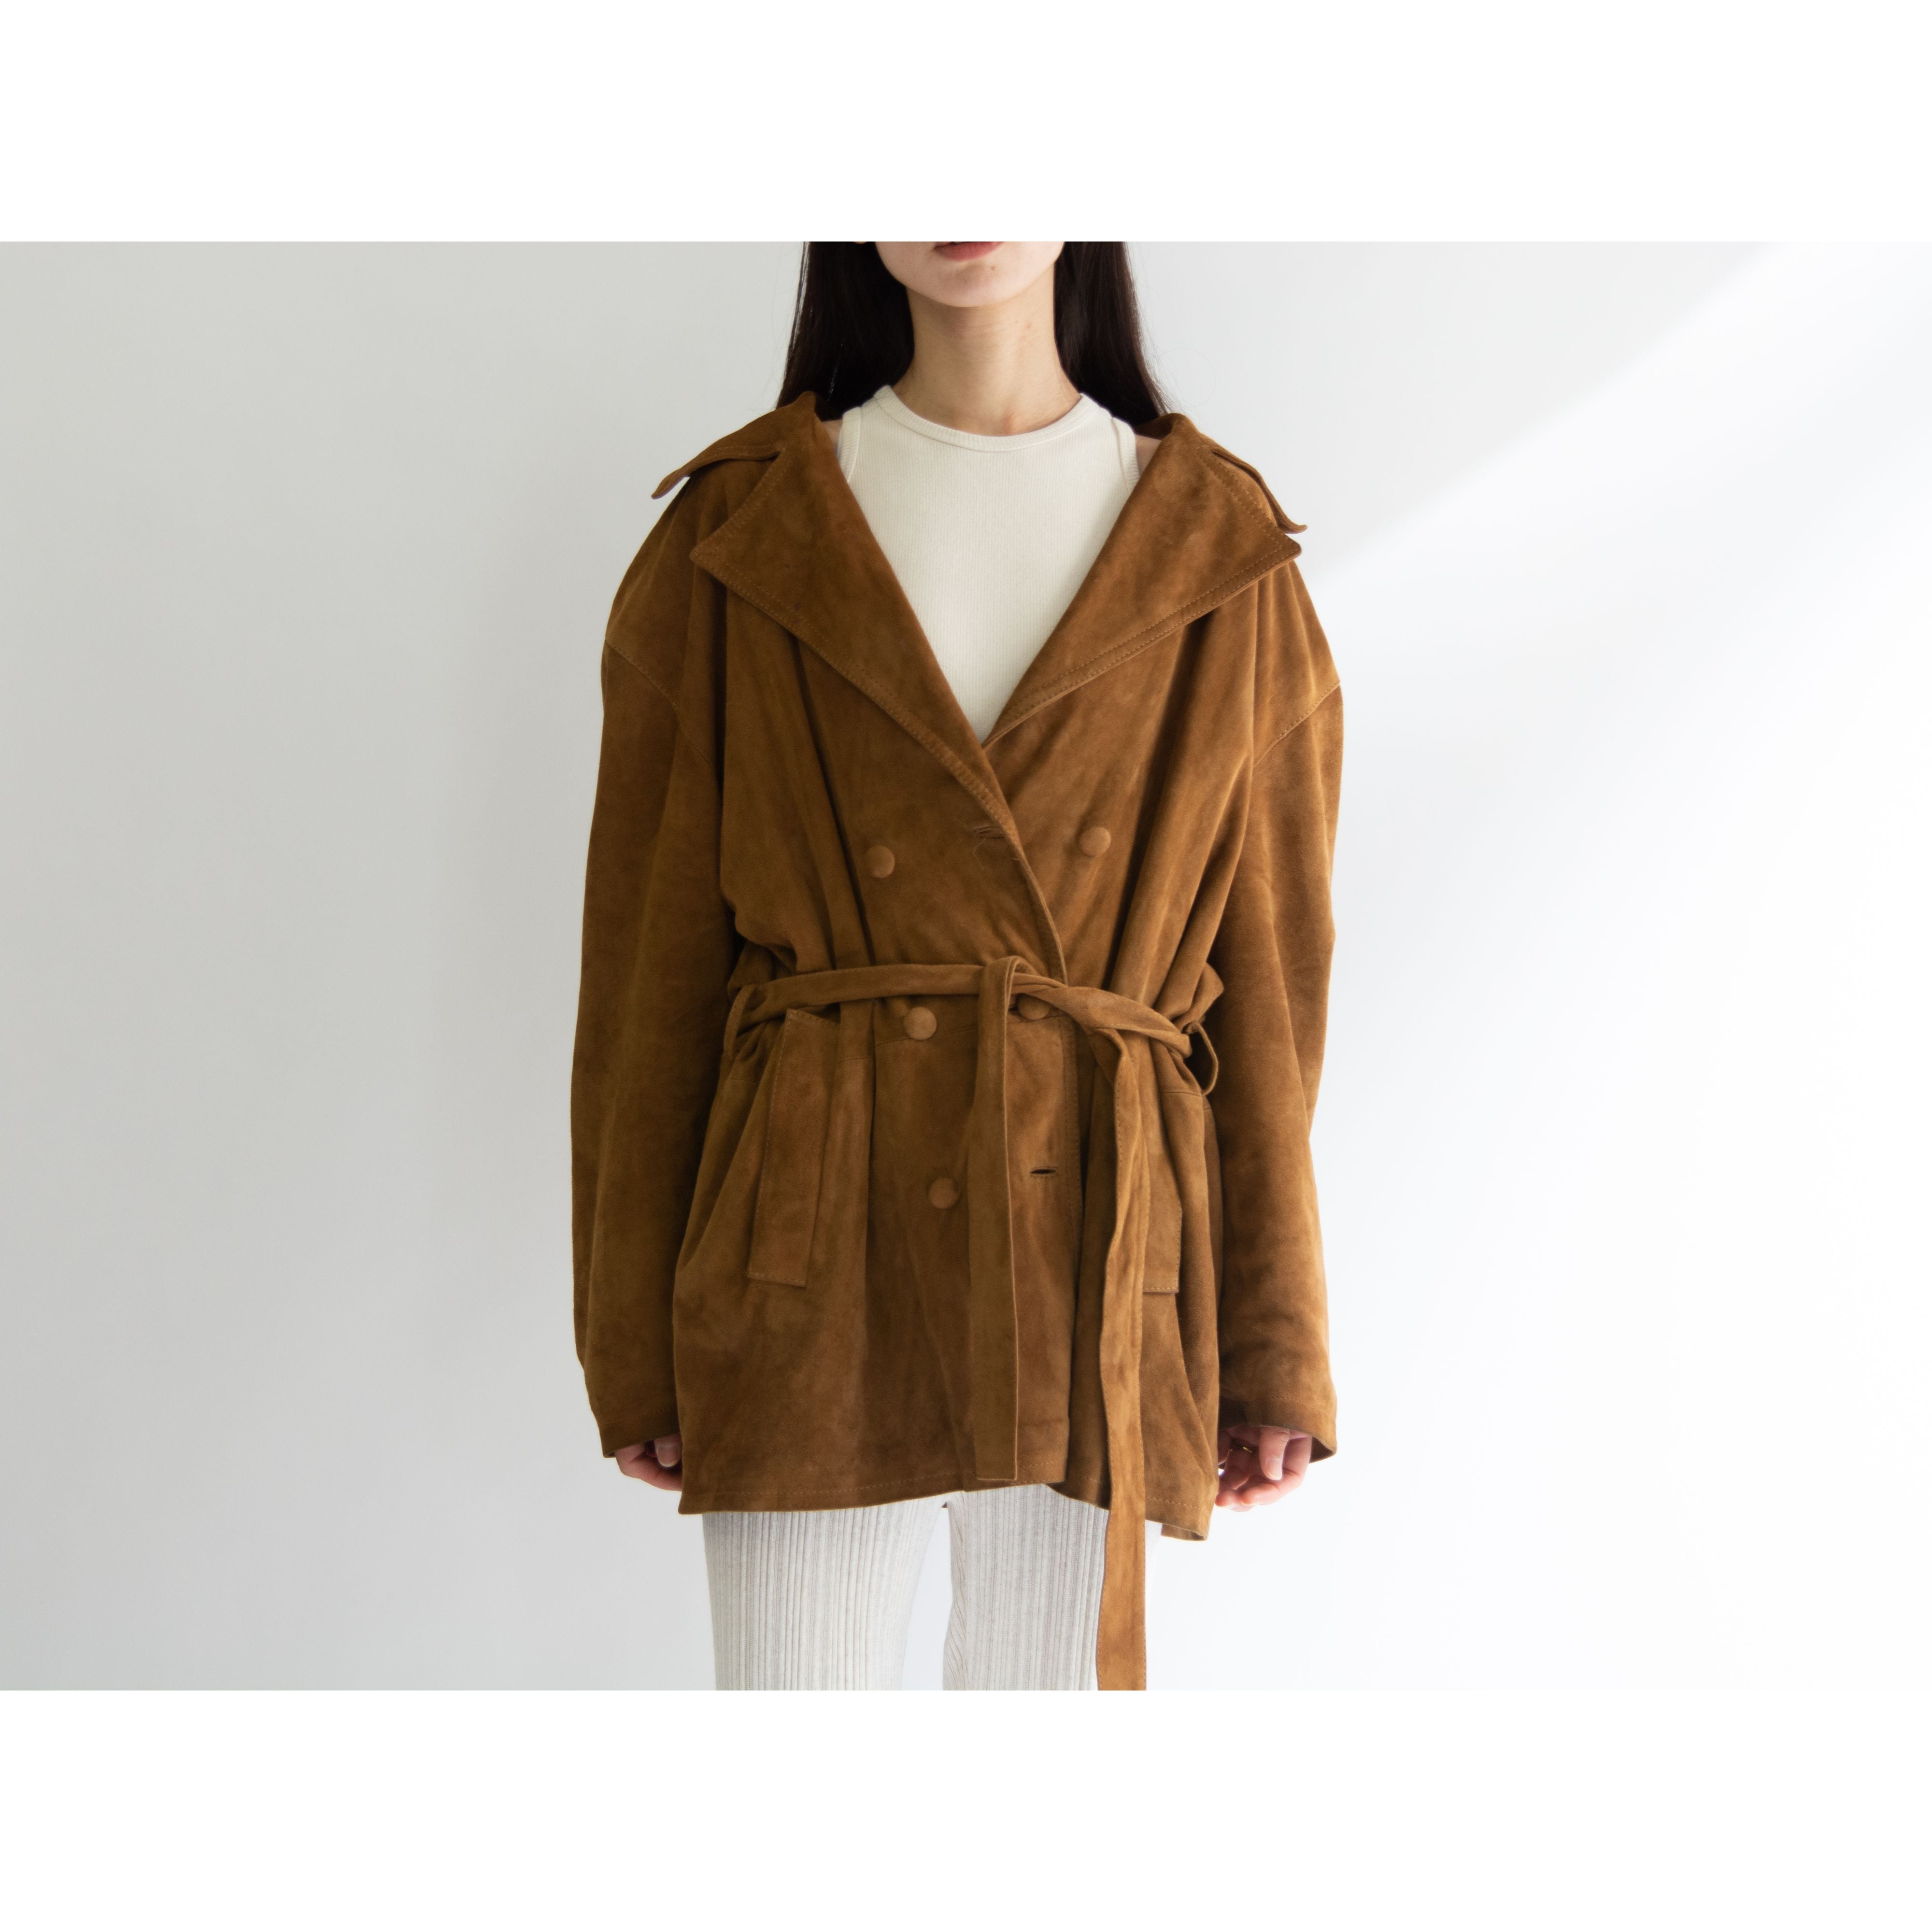 【Made in Italy】Oversized Suede Leather Belted Jacket（イタリア製 スエードレザー オーバーサイズベルテッドジャケット）